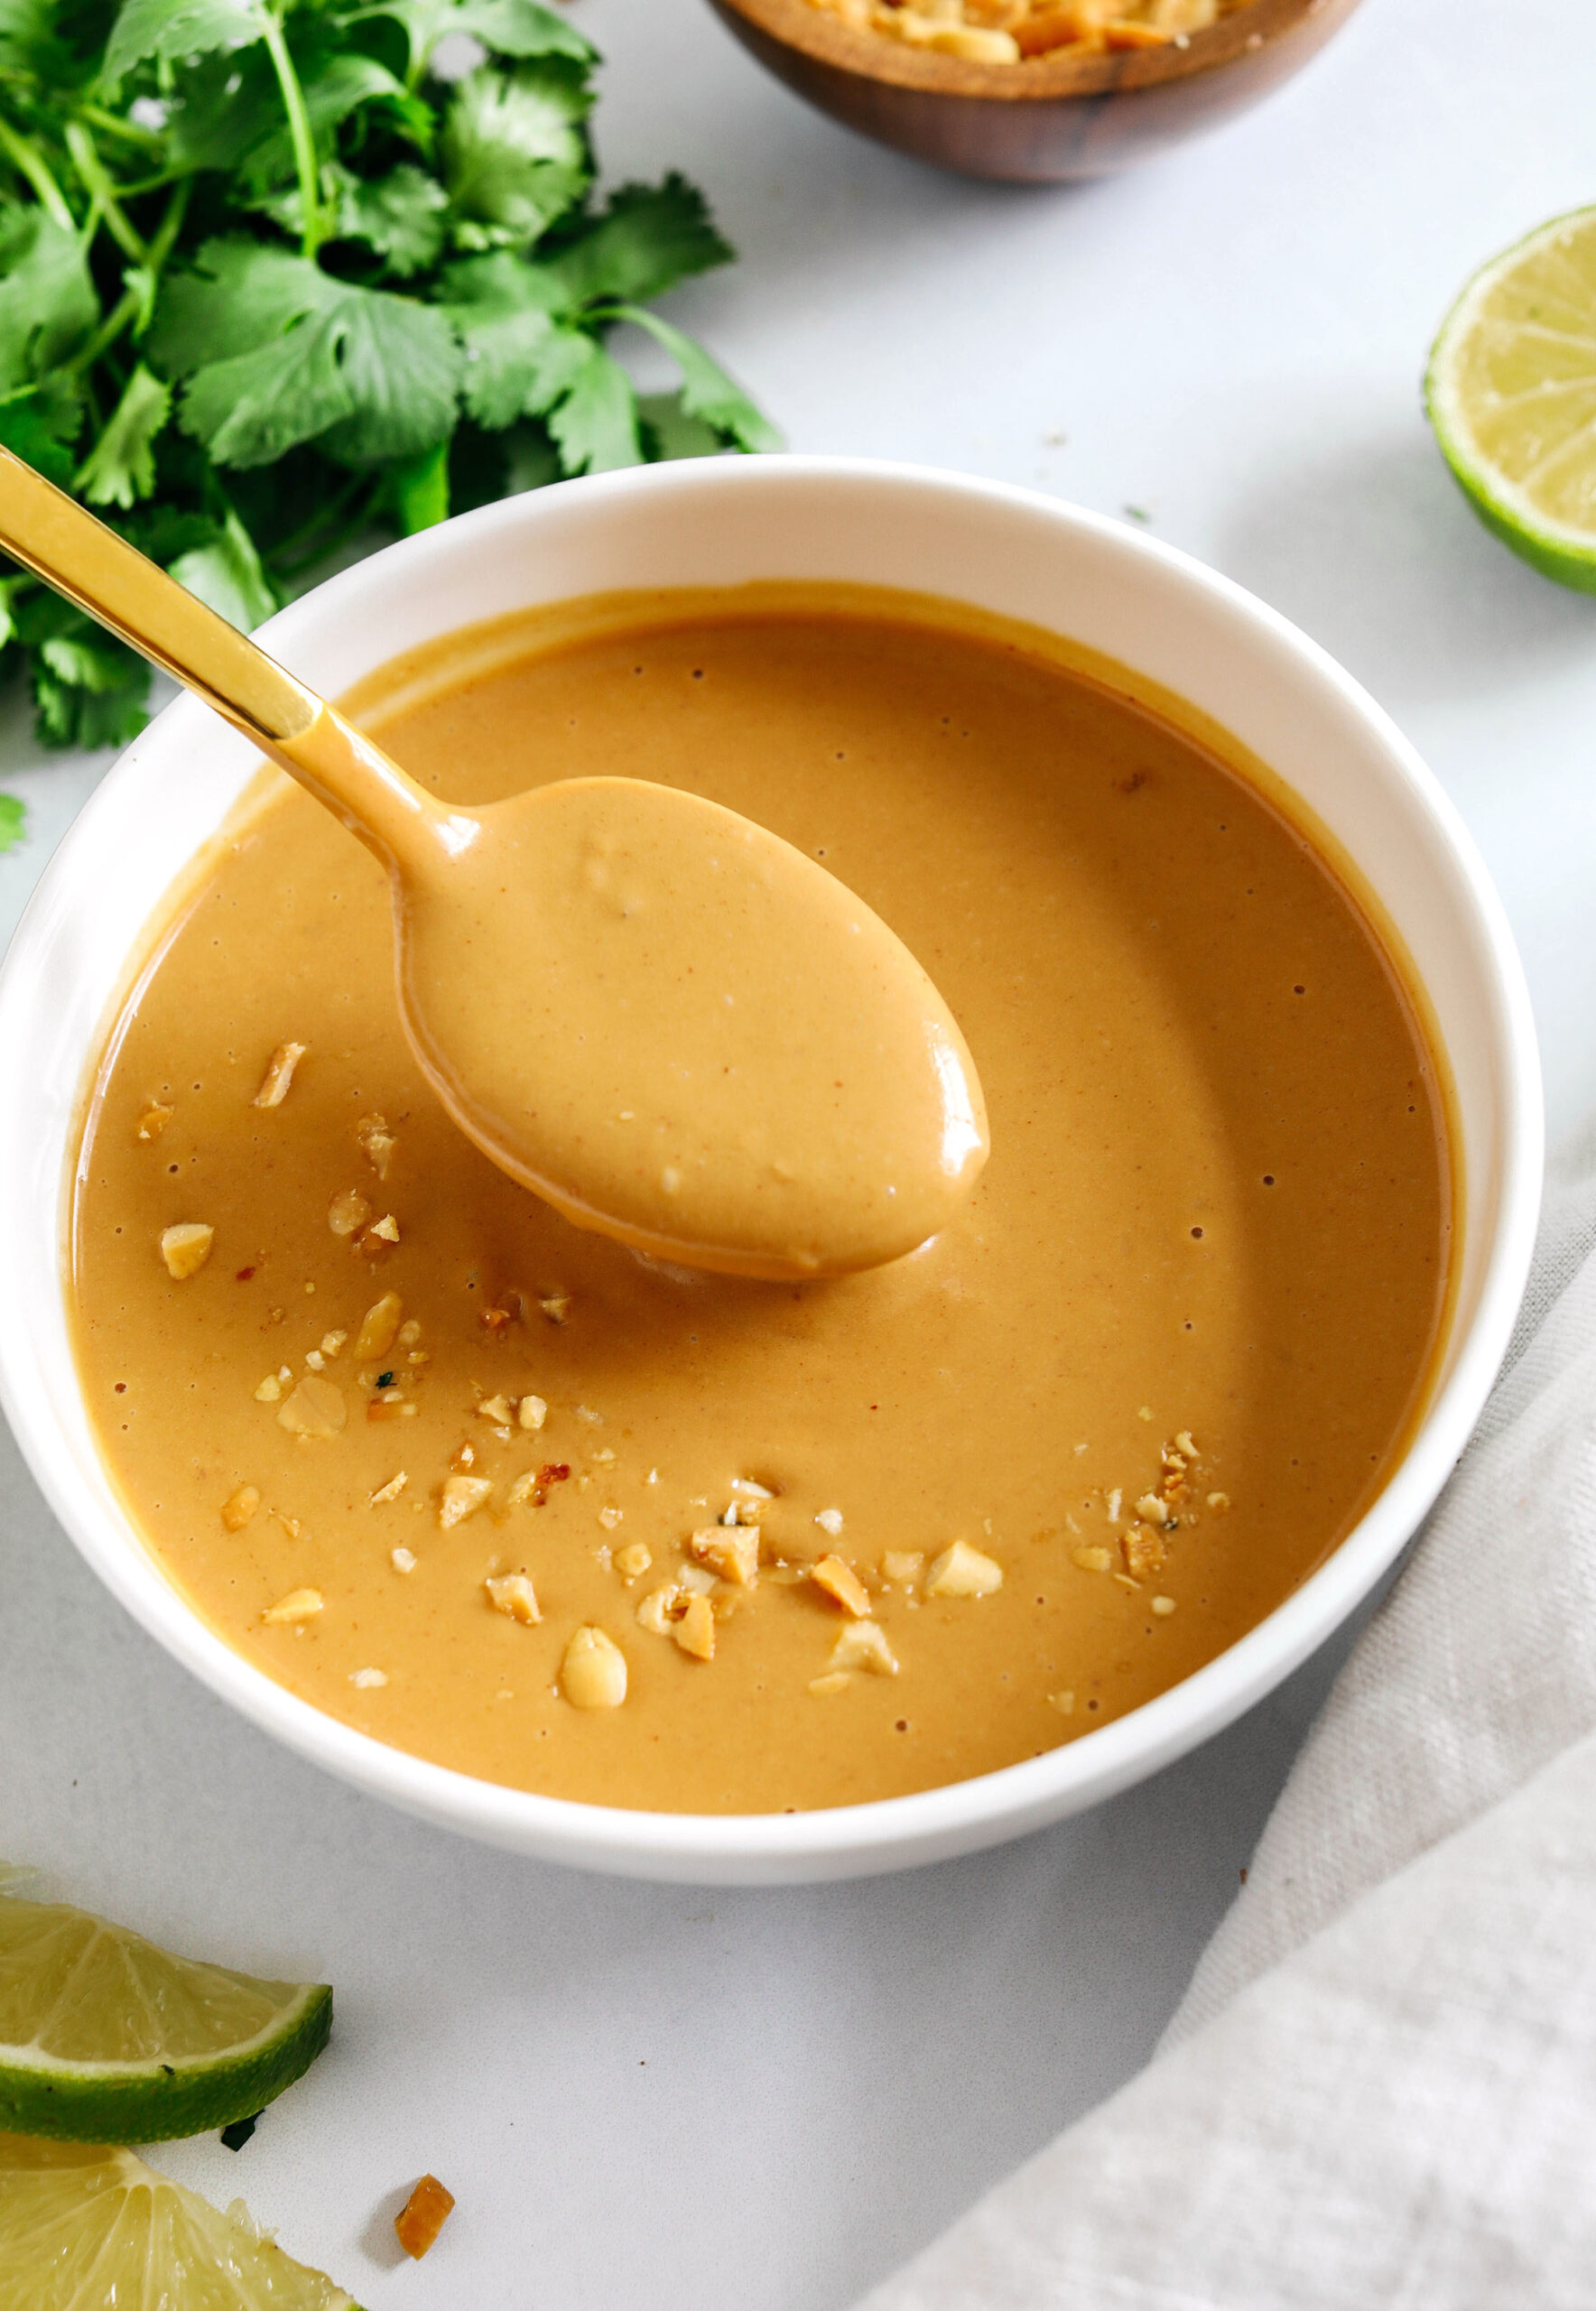 The most delicious Peanut Dipping Sauce loaded with flavors like garlic, ginger, lime and honey all easily made in just 5 minutes! Perfect drizzled over chicken, noodles, salads, wraps and so much more!